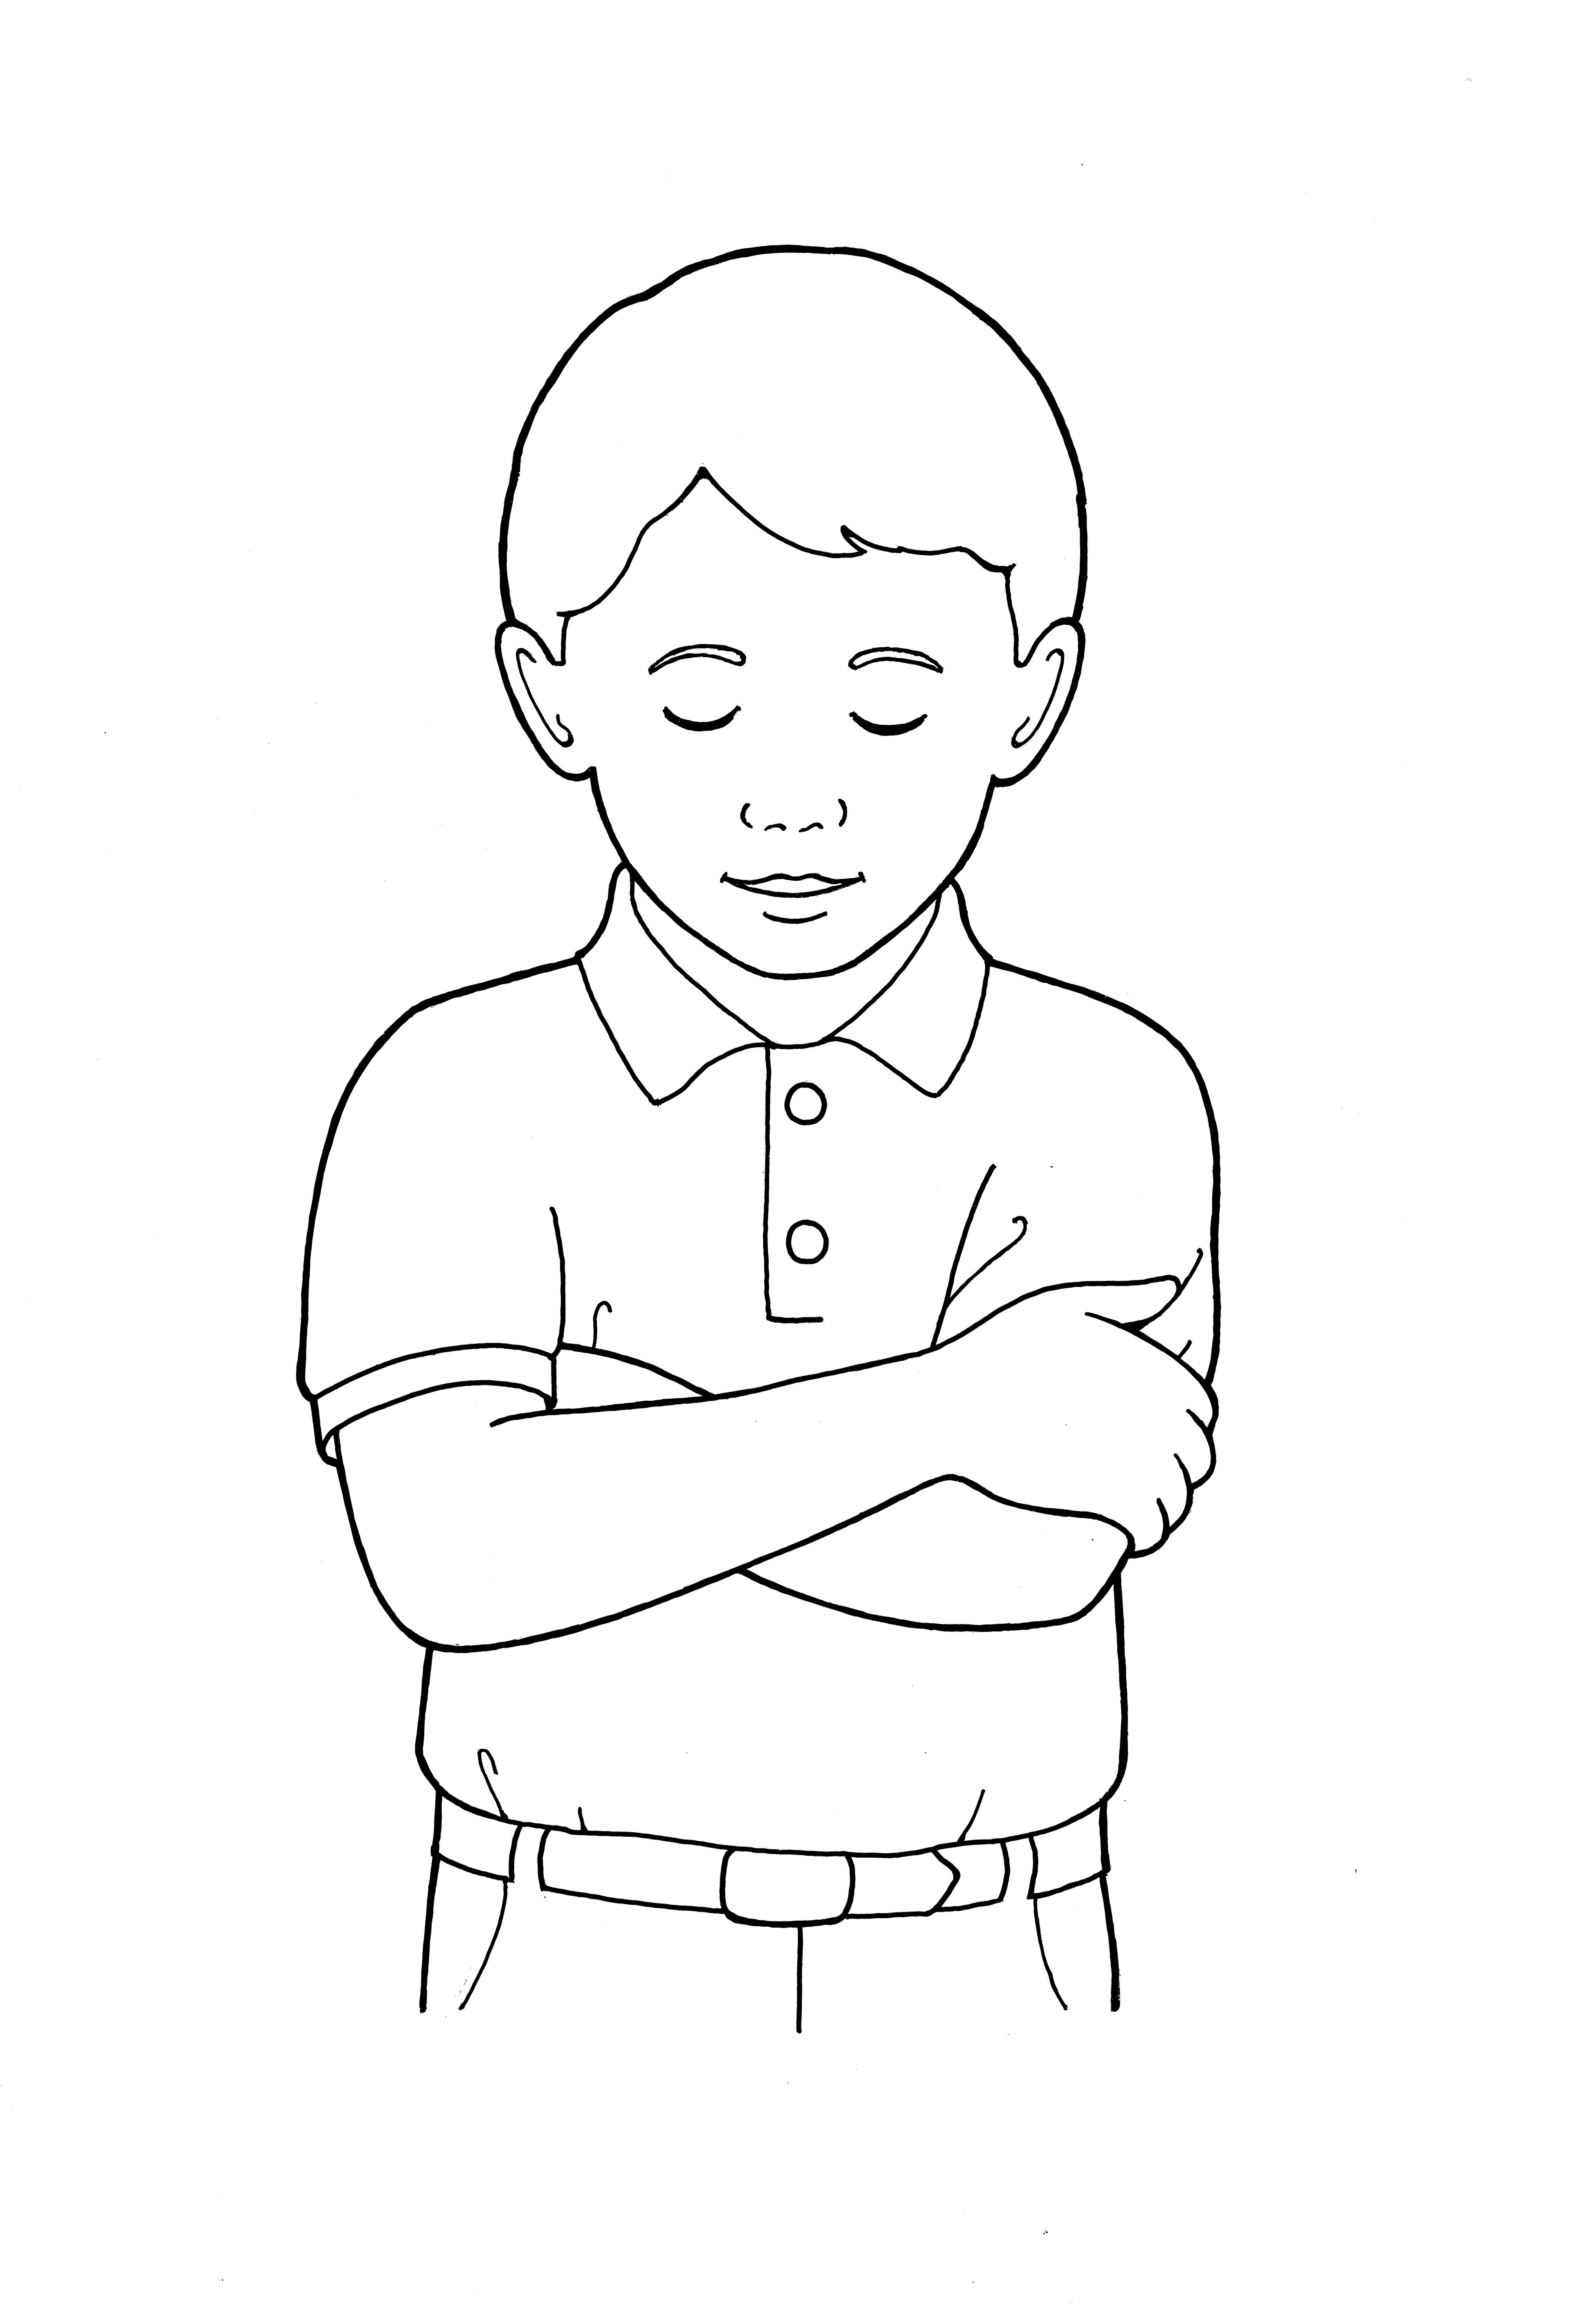 An illustration of a boy praying, from the nursery manual Behold Your Little Ones (2008), page 87.